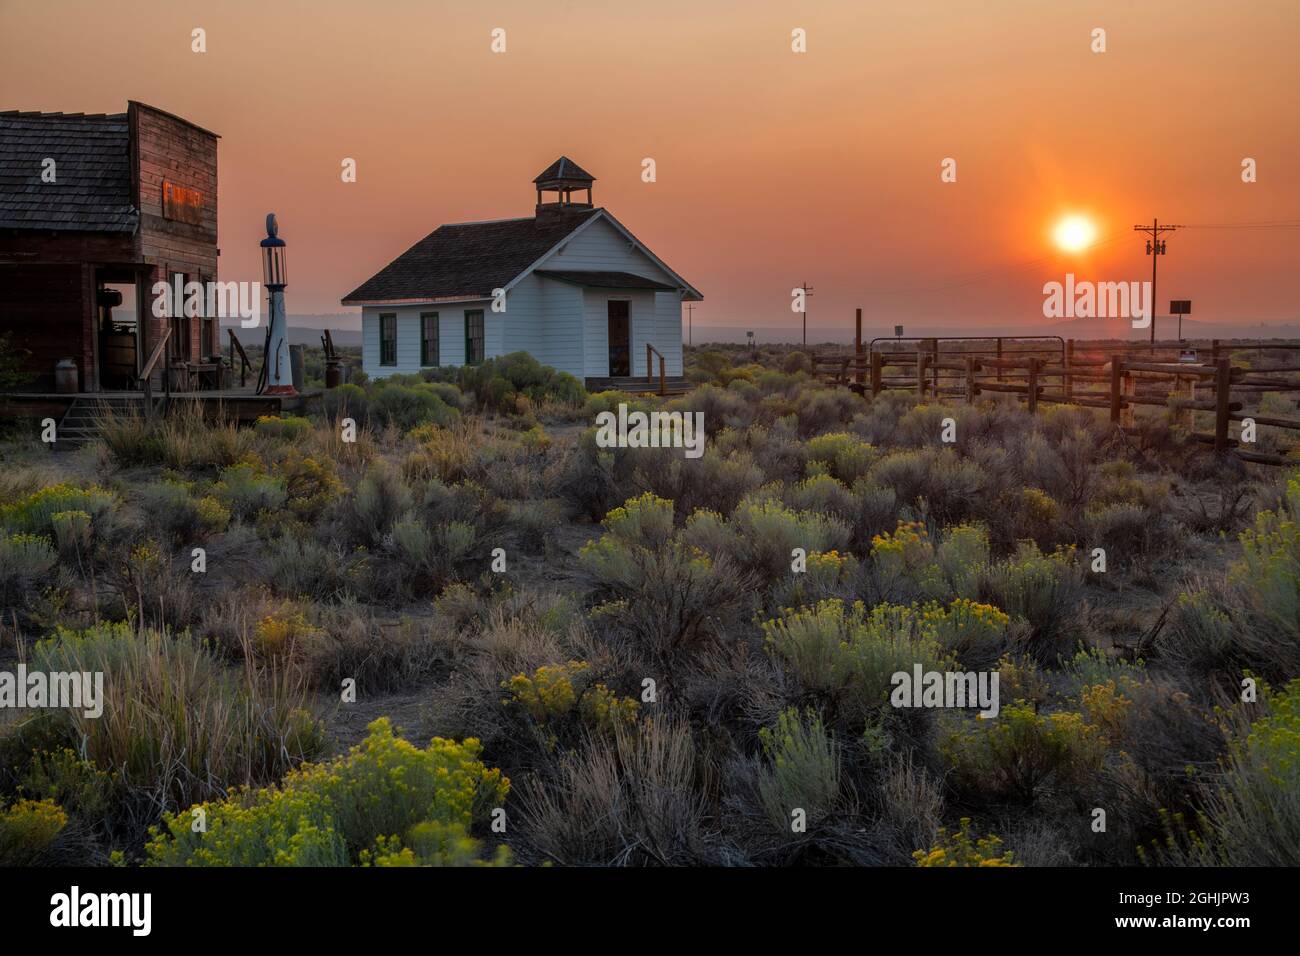 USA, Oregon, Central, Fort Rock Homestead Museum, Astro Sky Stock Photo